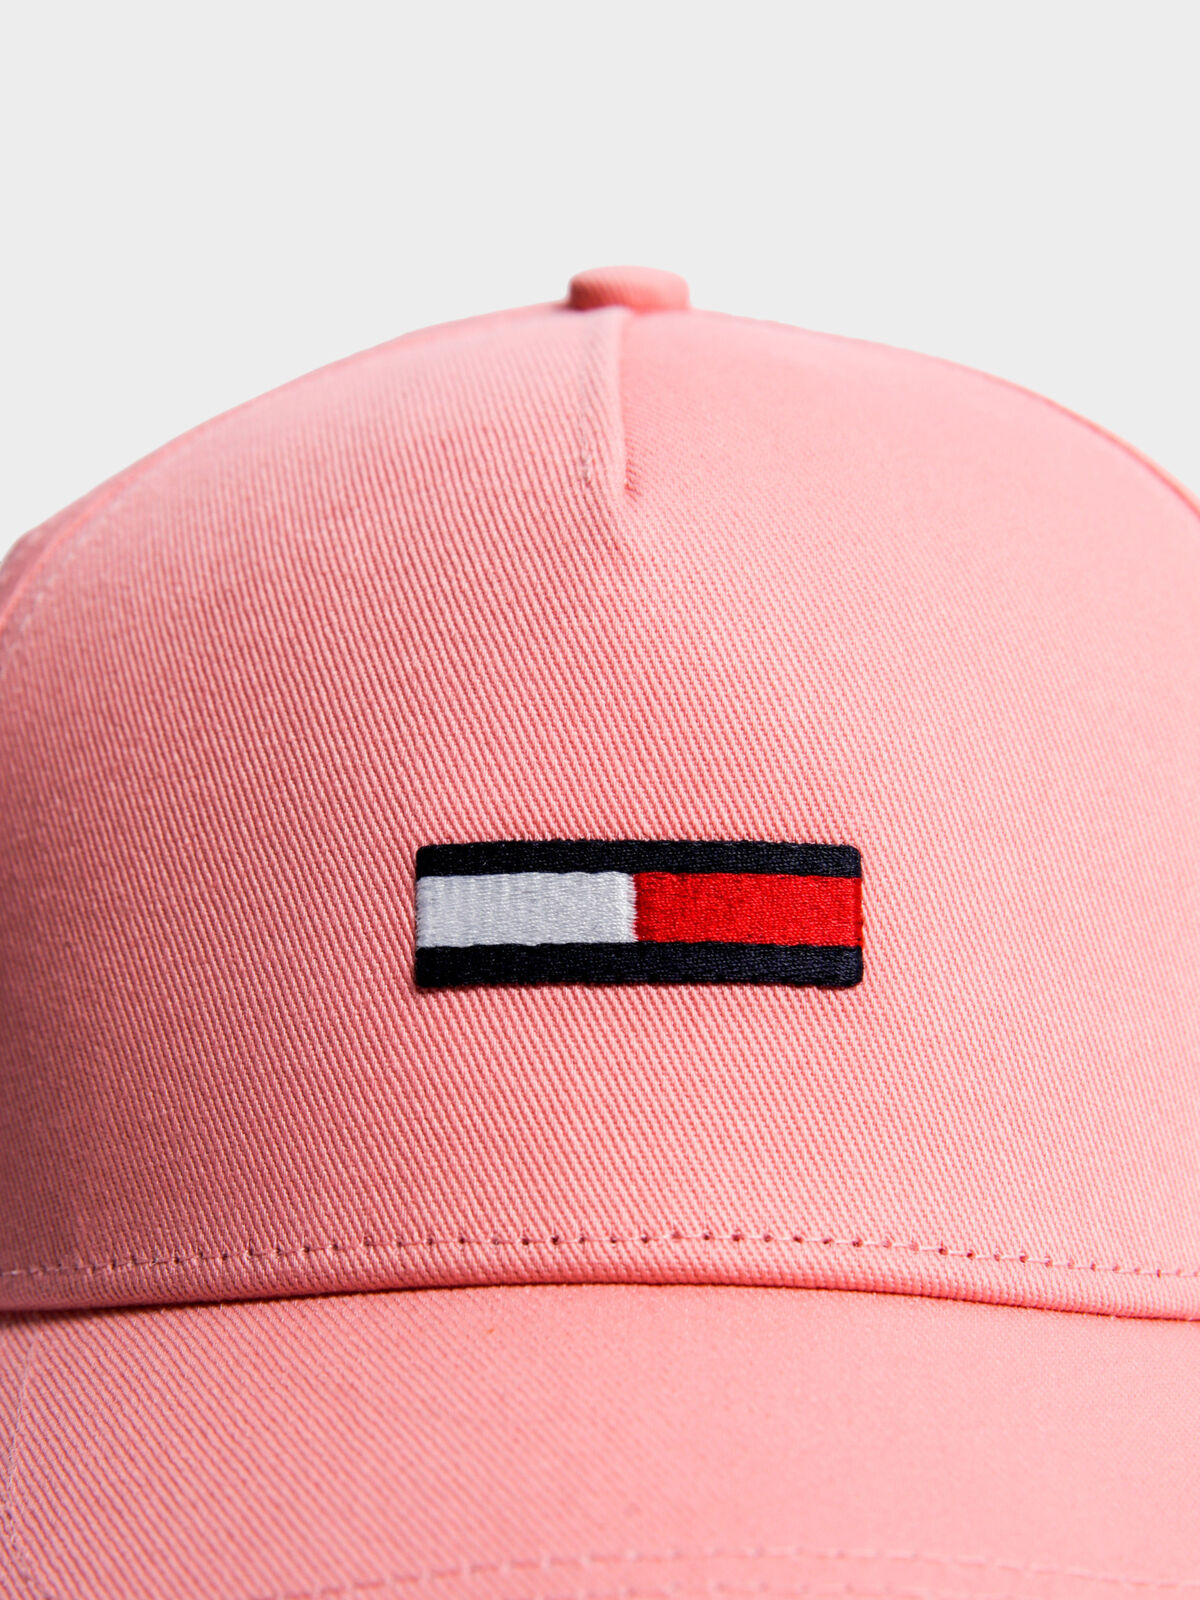 Basic Flag Cap in Pink Icing